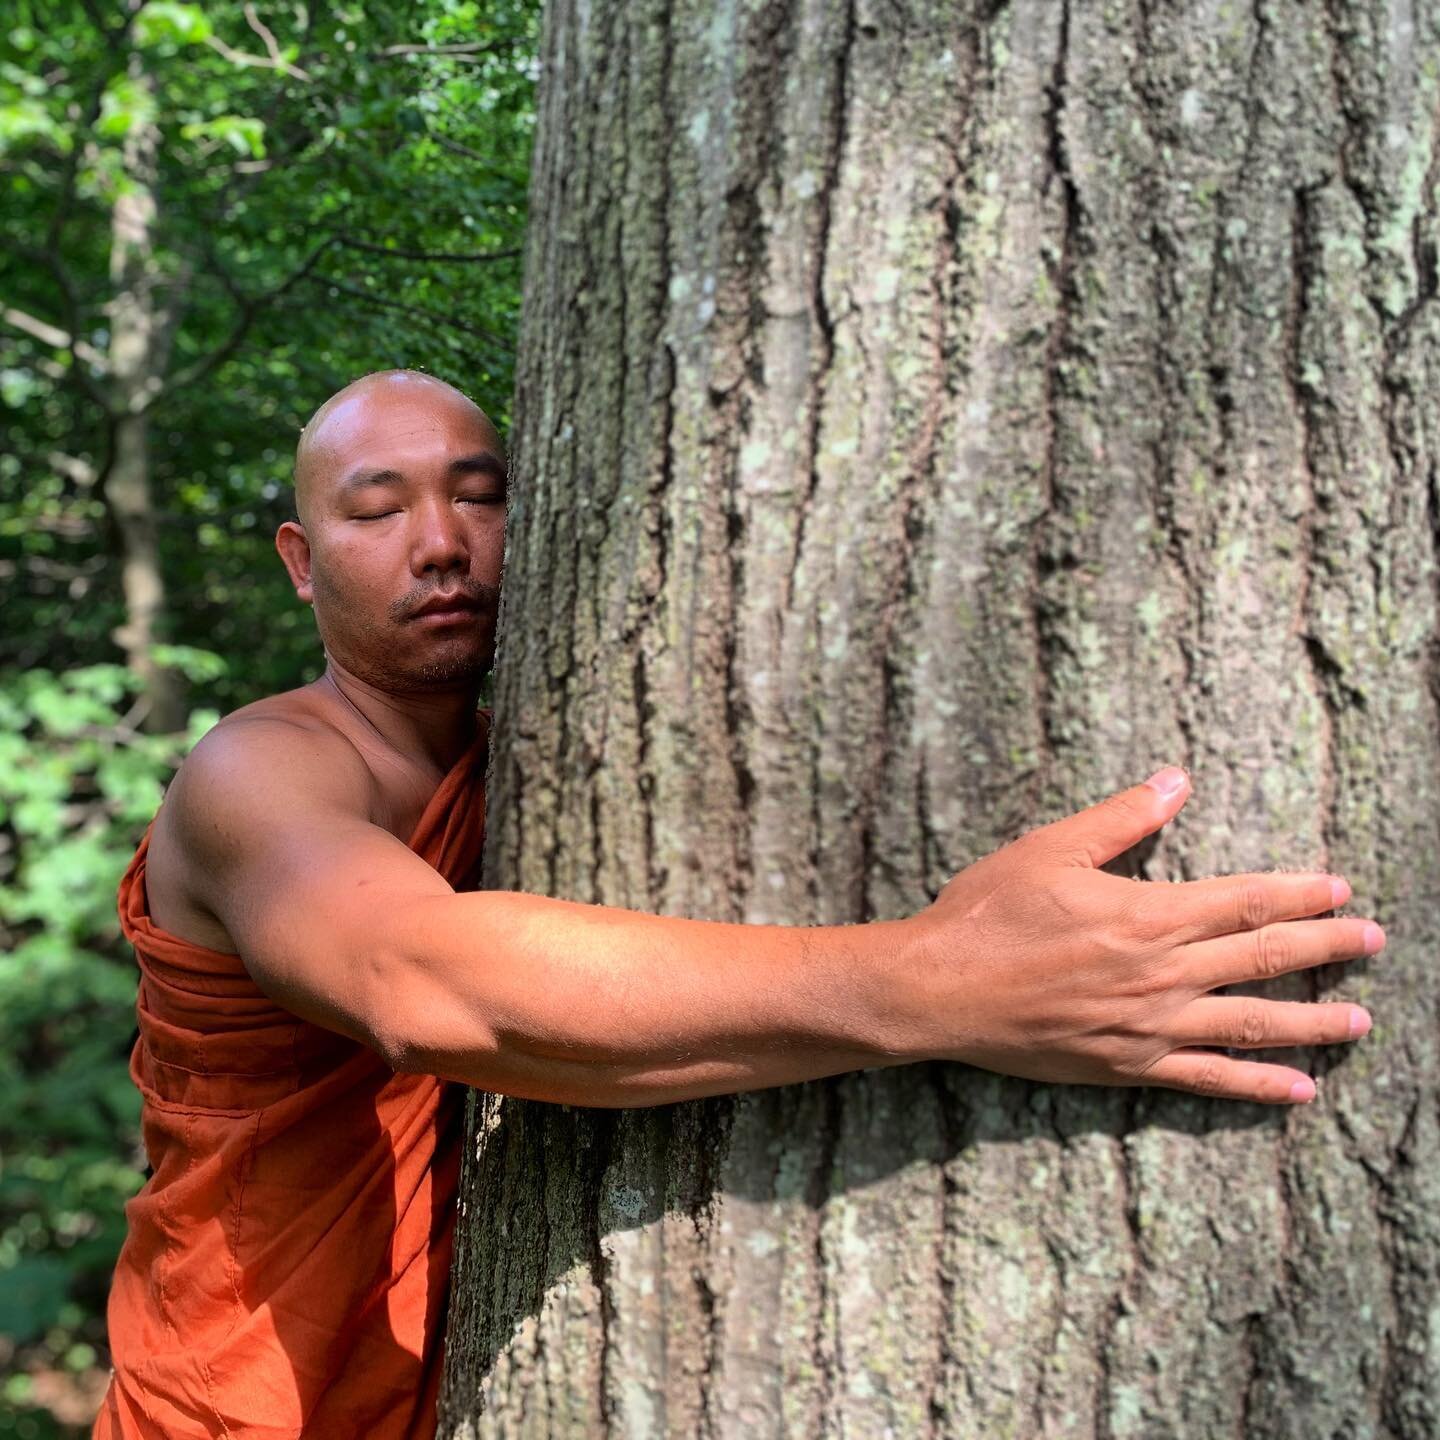 What America needs right now: a hug. 

🧘🏽&zwj;♂️@mysticmonk2 #maine #treehugger #hugs #zen #buddhism #buddhistmonk #compassion #election2020 #latergram #tbt #goodvibesonly